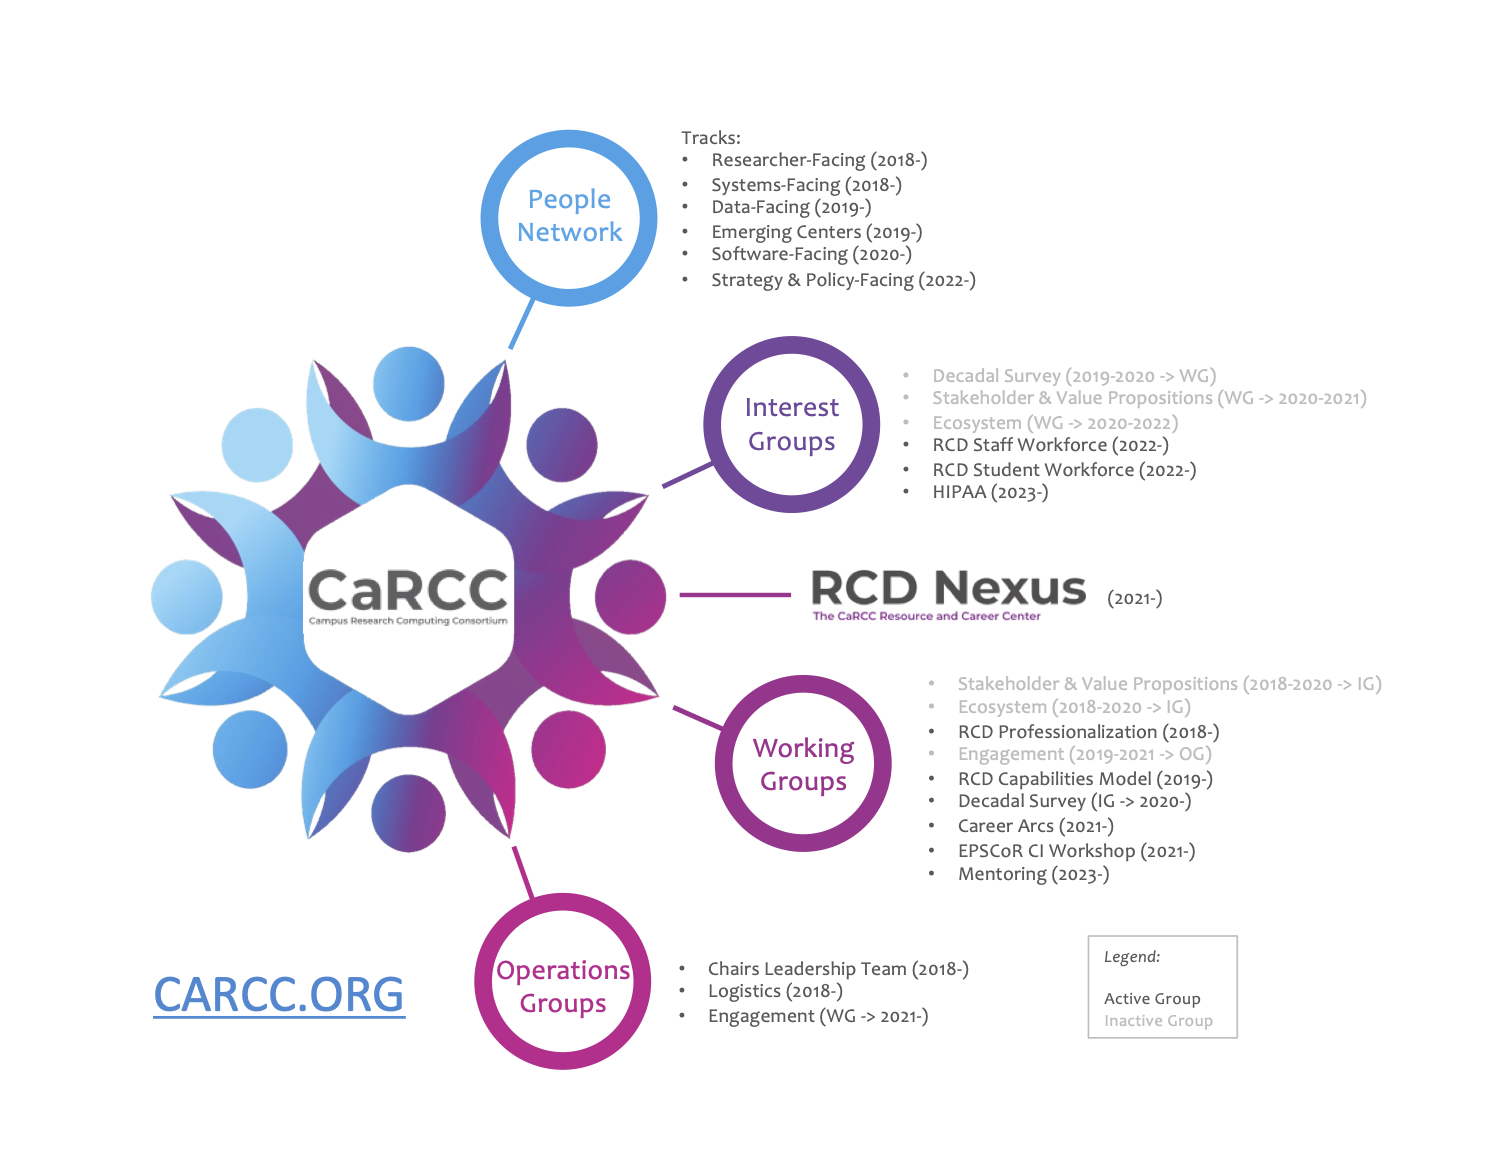 Overview of CaRCC Organization and Groups